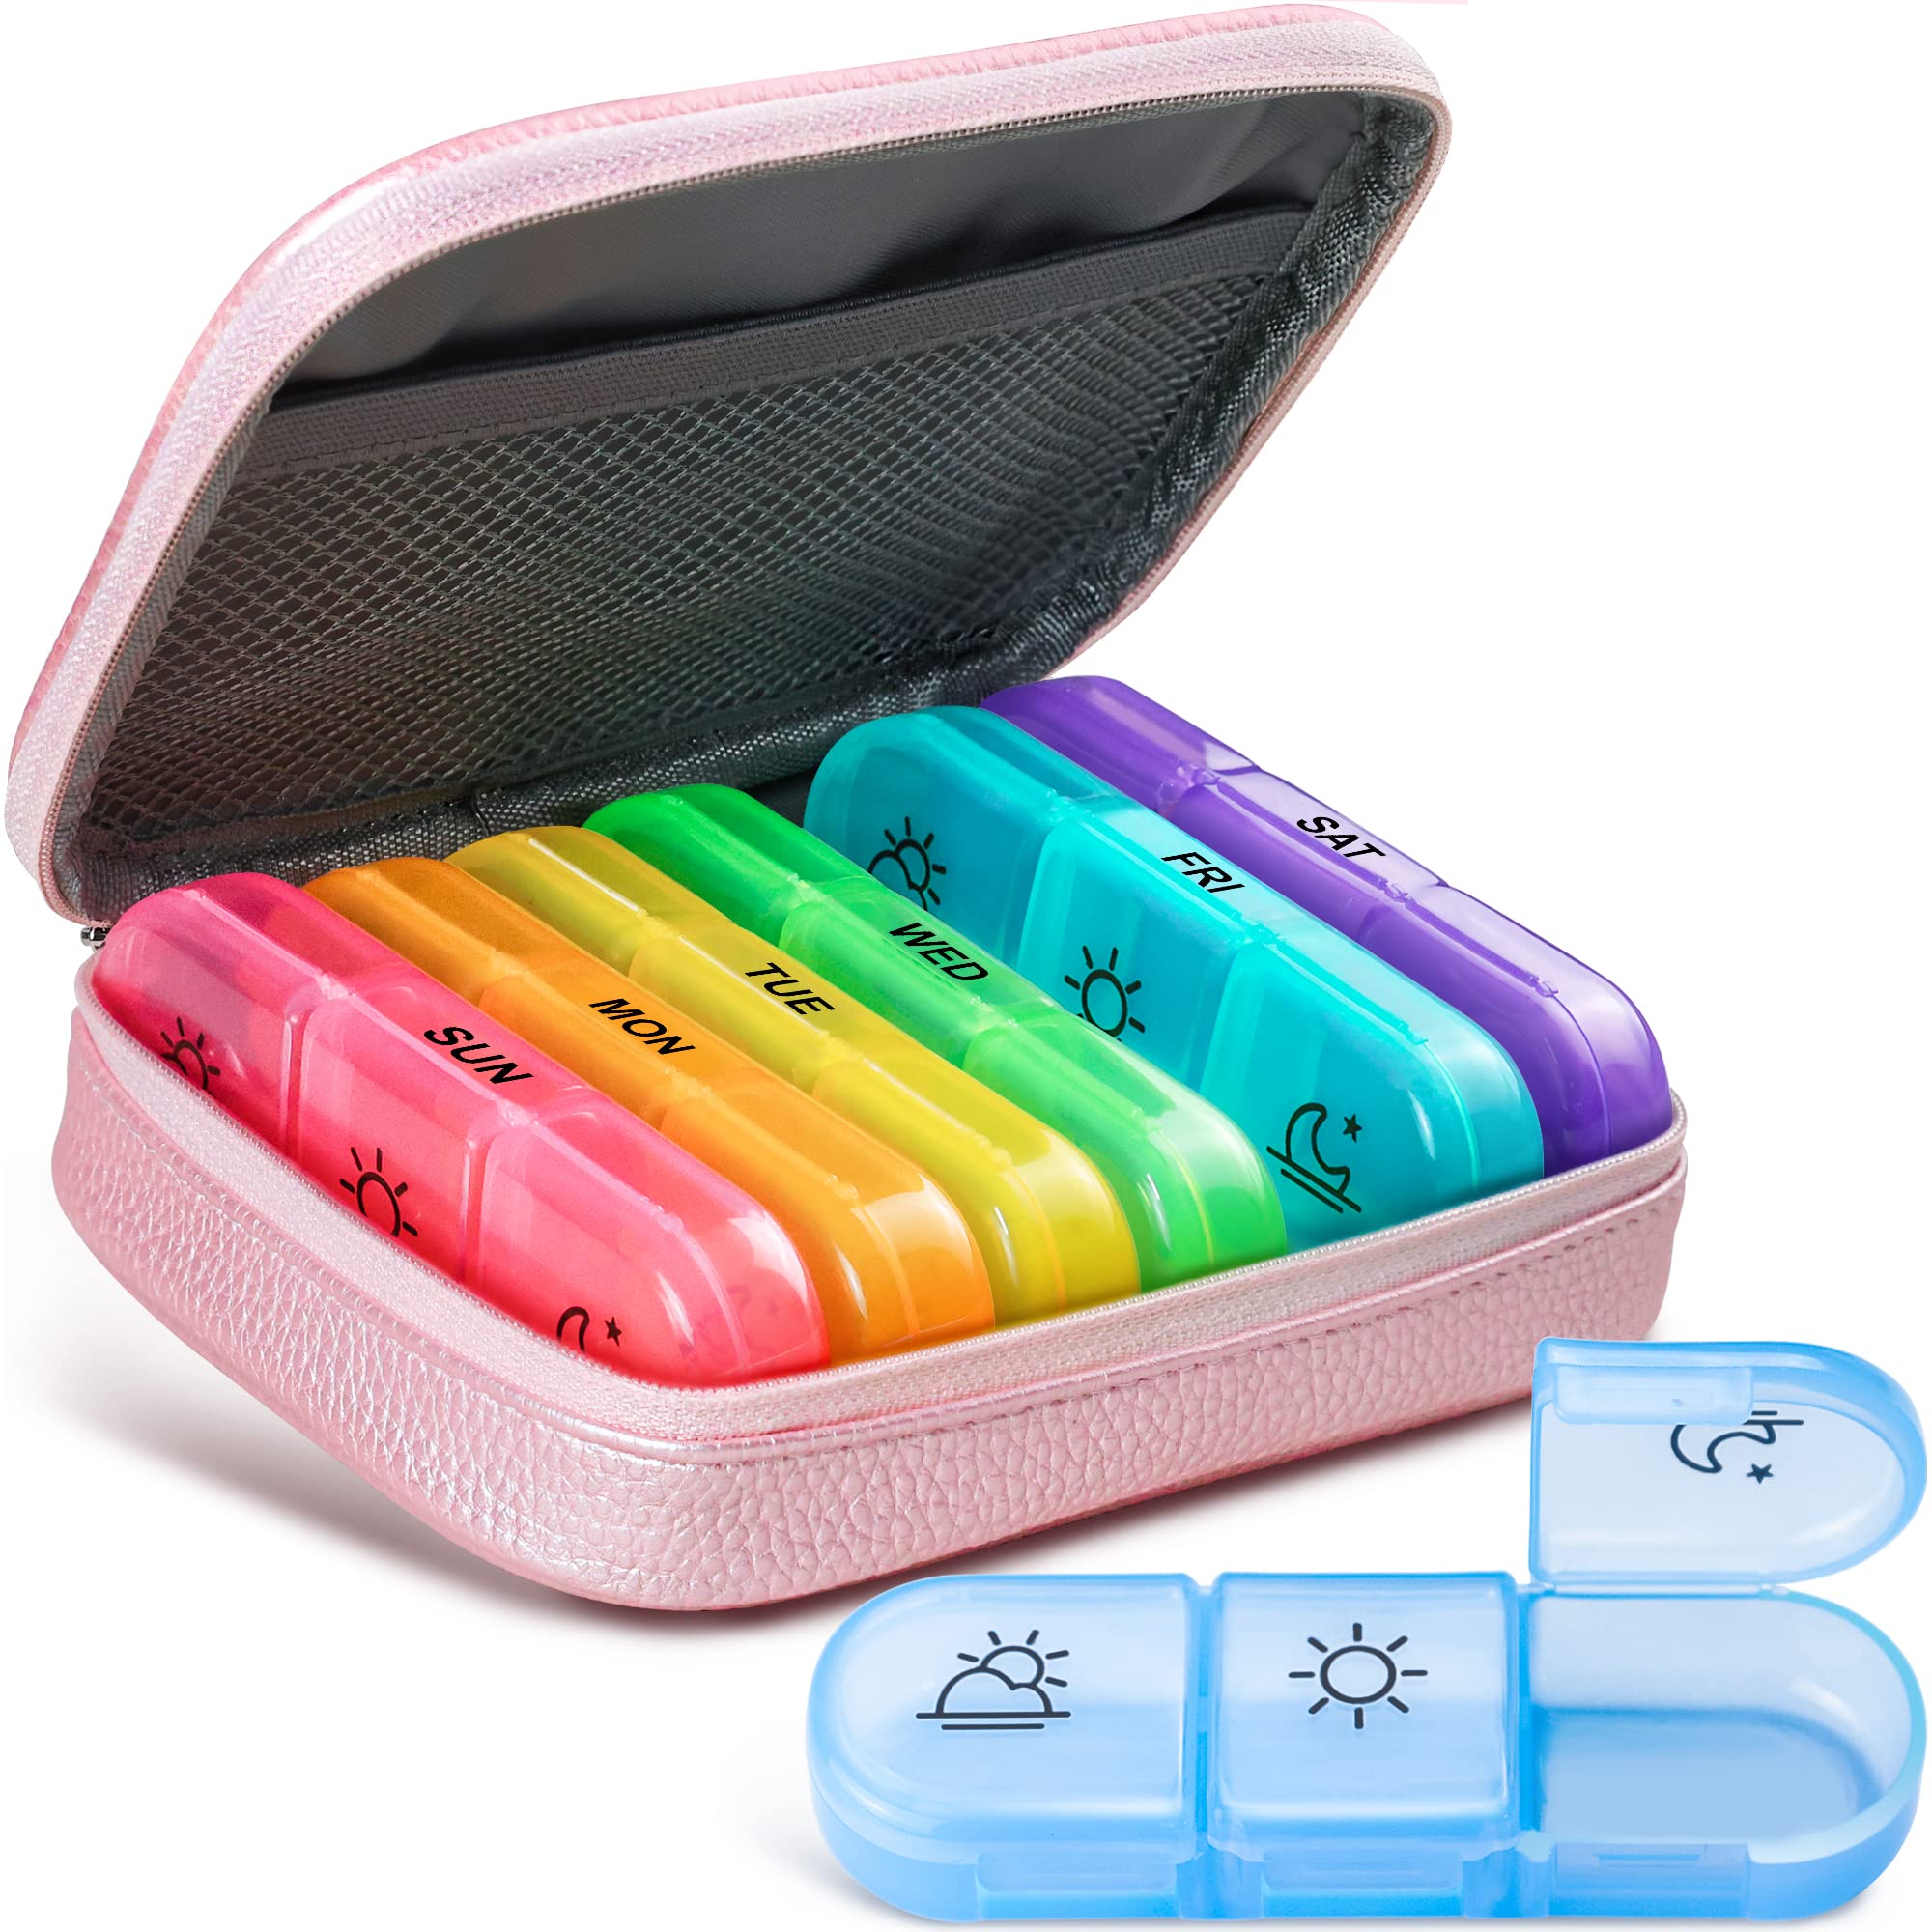 Cute Pill Organizer 2 Times a Day, AMOOS PU Leather Pill Case for Women,  Portable Weekly Pill Box for Purse with Storage Bag to Hold